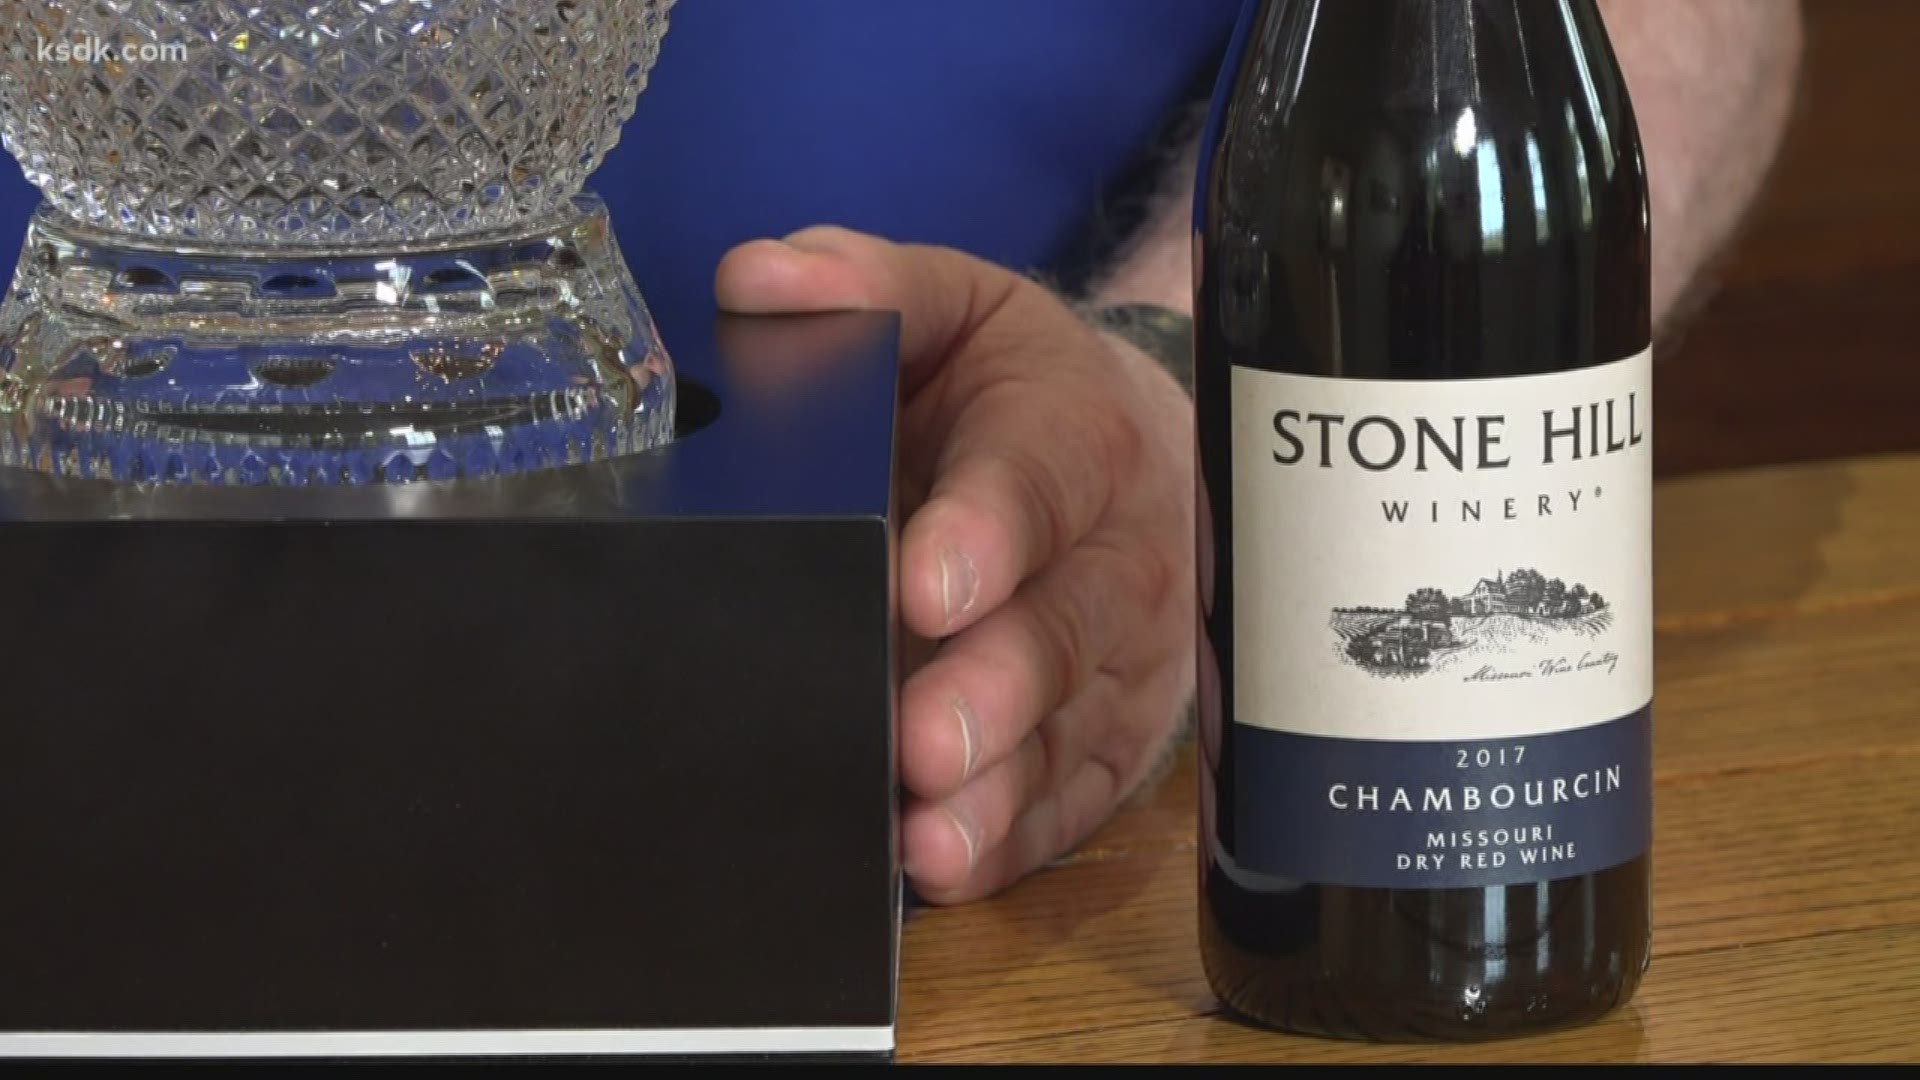 Check out Stone Hill Winery, located right here in the Show Me State.